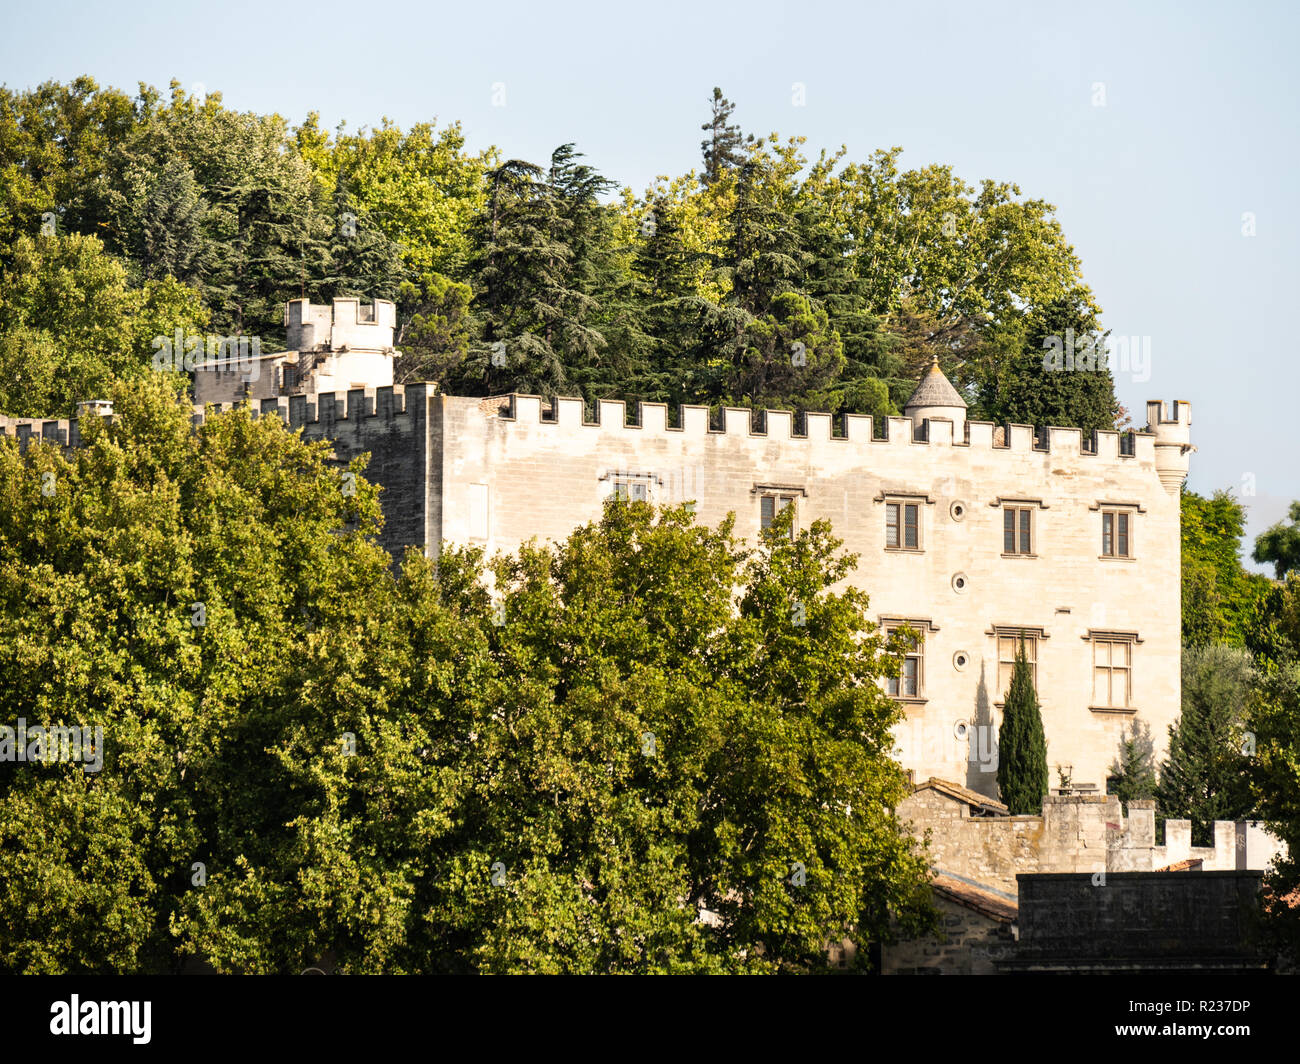 The Papal palace is an historical palace located in Avignon, southern France. It is one of the largest and most important medieval Gothic buildings in Stock Photo